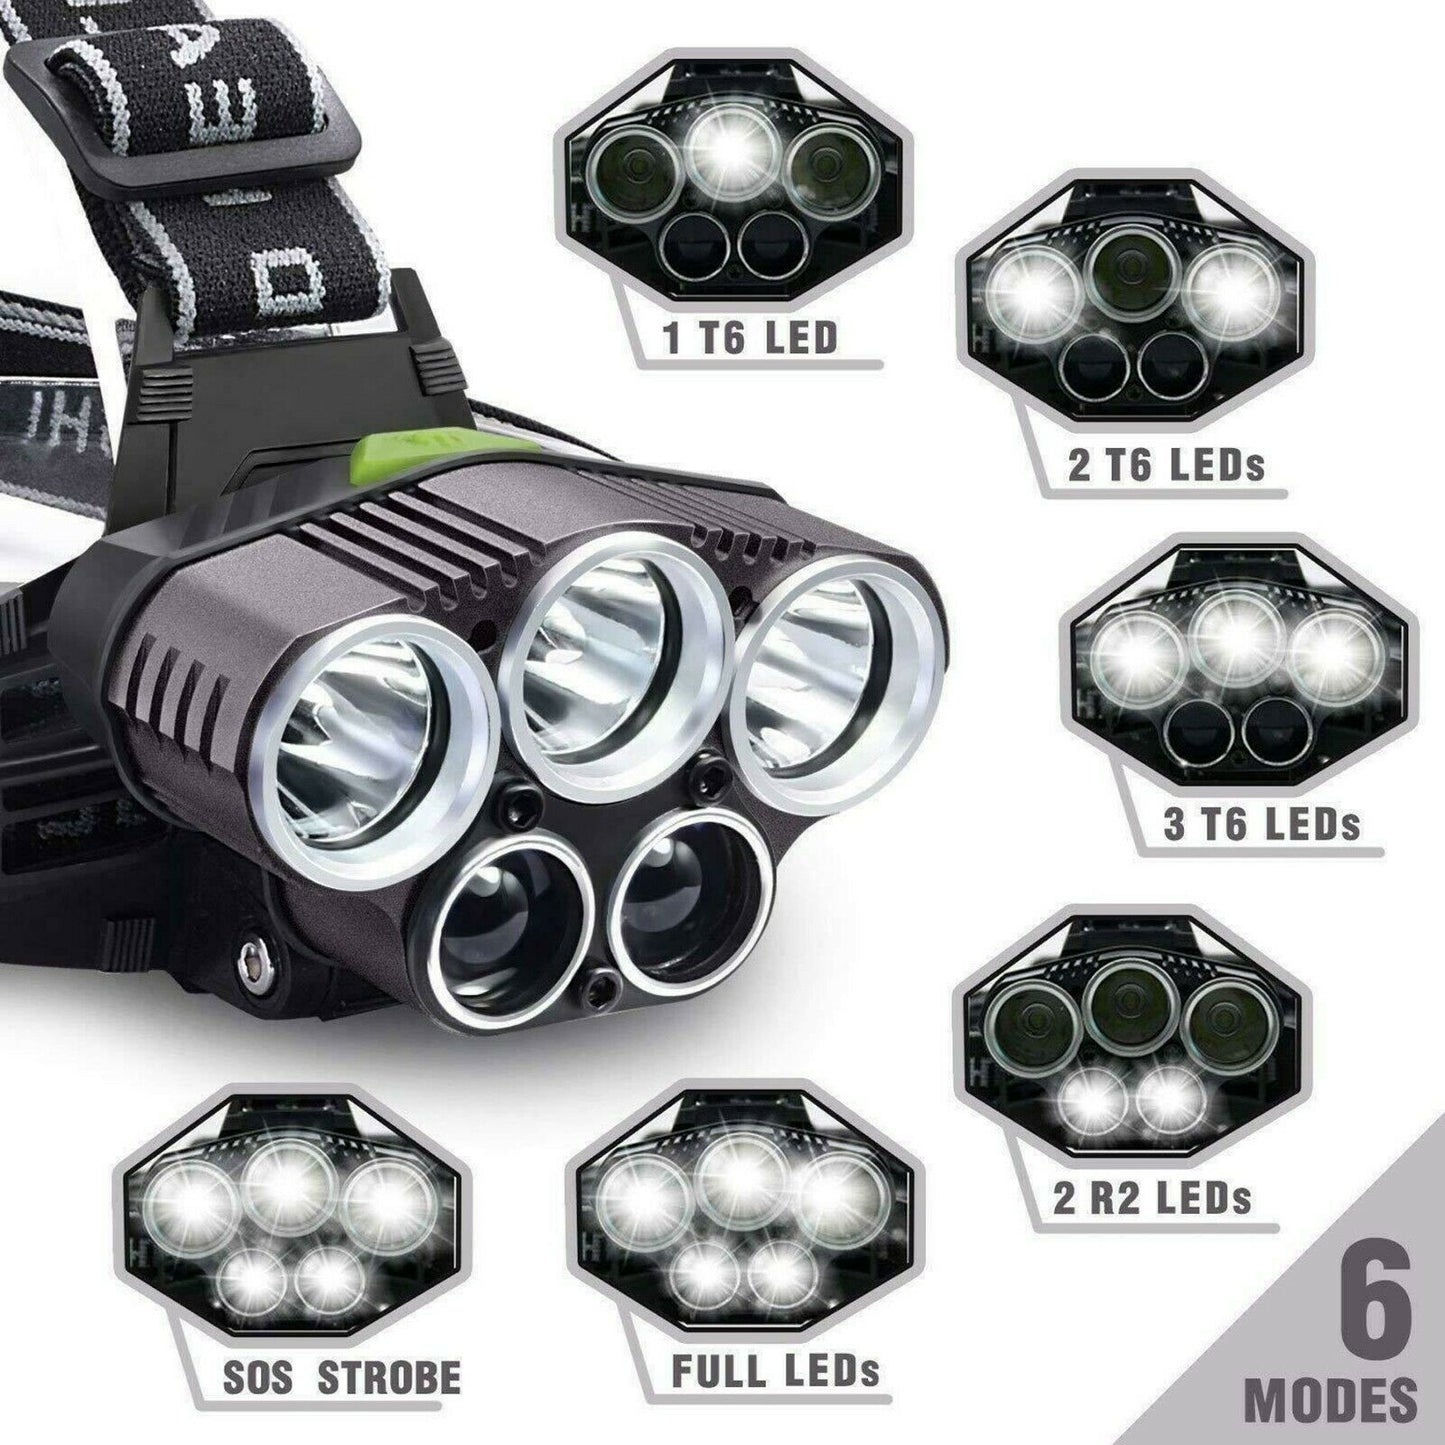 250000LM 5X T6 LED Headlamp Rechargeable Head Light Flashlight Torch Lamp